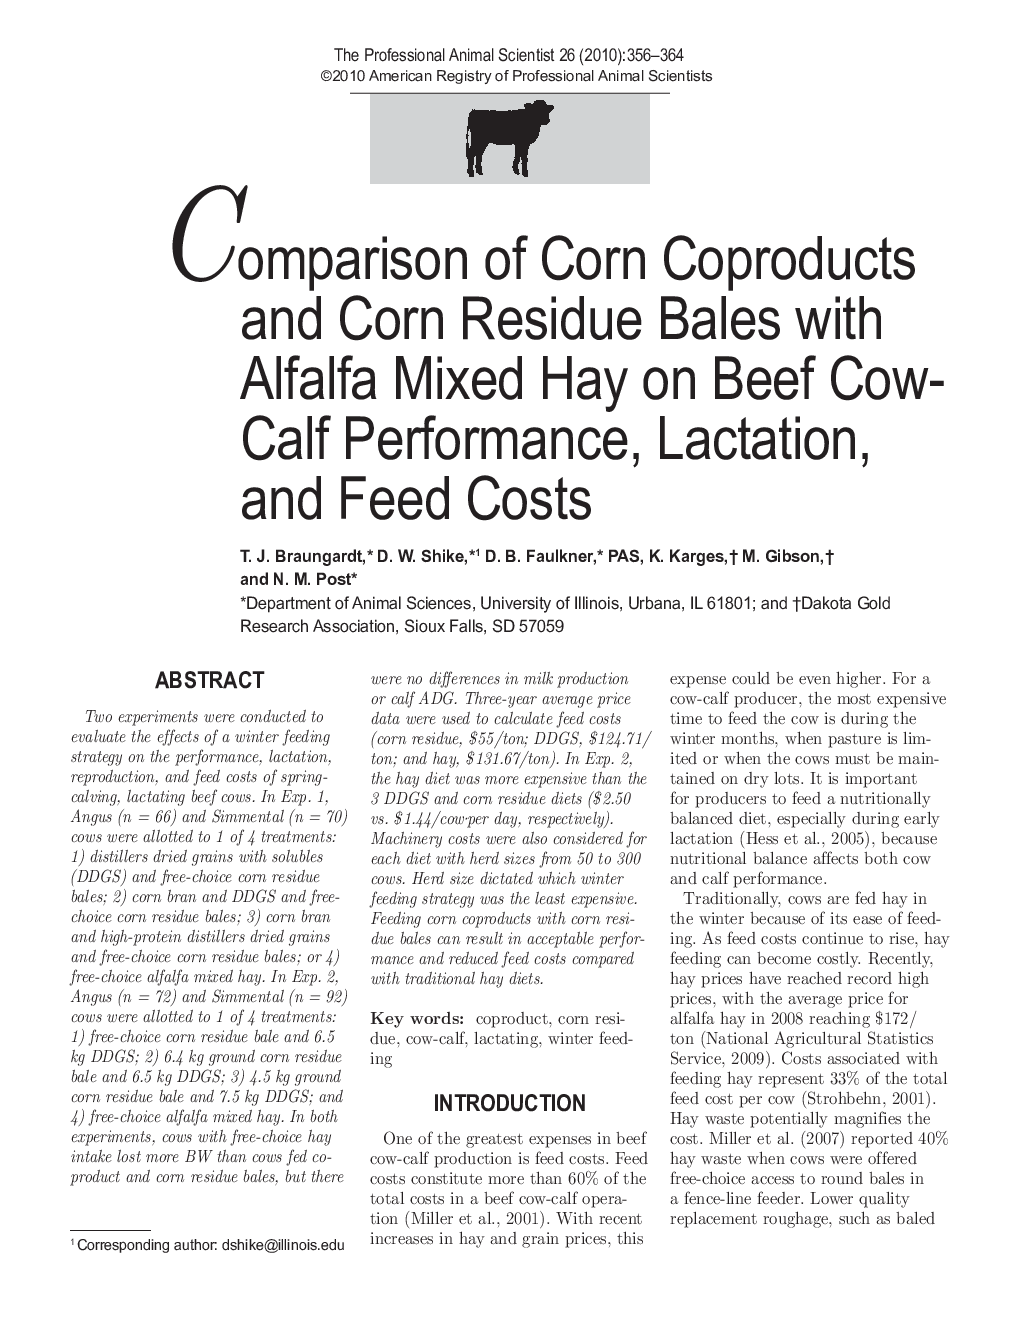 Comparison of Corn Coproducts and Corn Residue Bales with Alfalfa Mixed Hay on Beef Cow-Calf Performance, Lactation, and Feed Costs